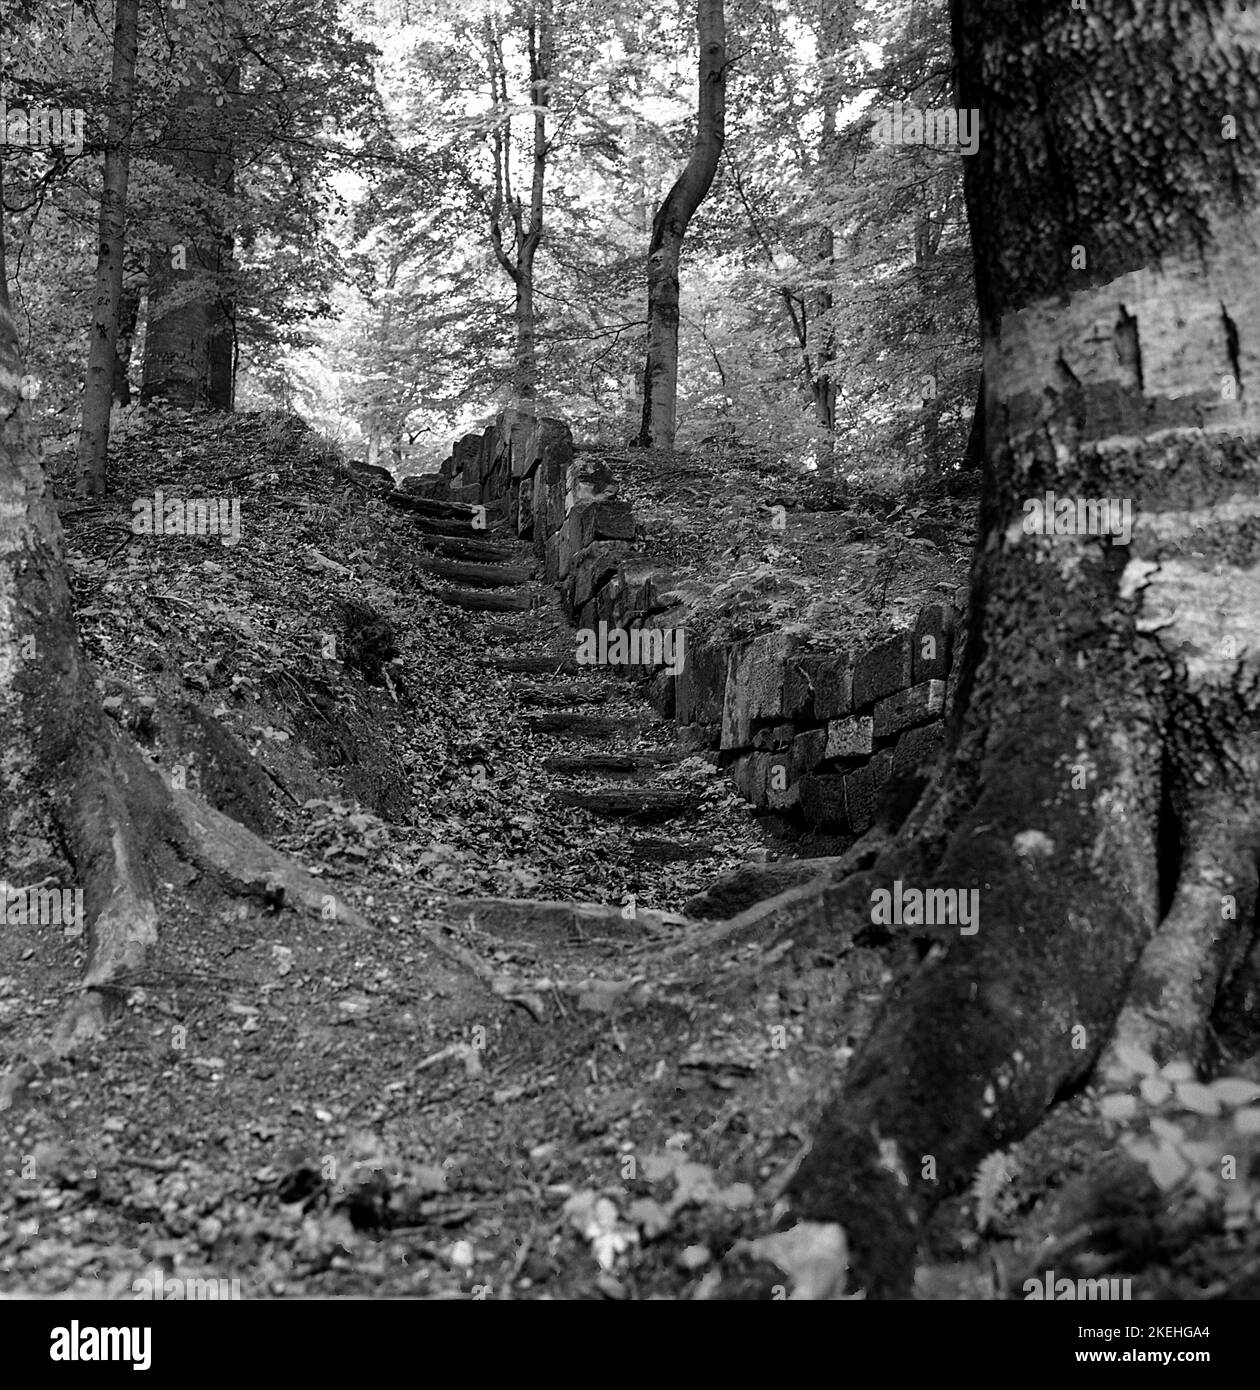 Hunedoara County, Romania, 1975. Steps to the site of the ancient Sarmizegetusa Regia Fortress, the capital of the Dacians, built in the 1st century B.C. Stock Photo